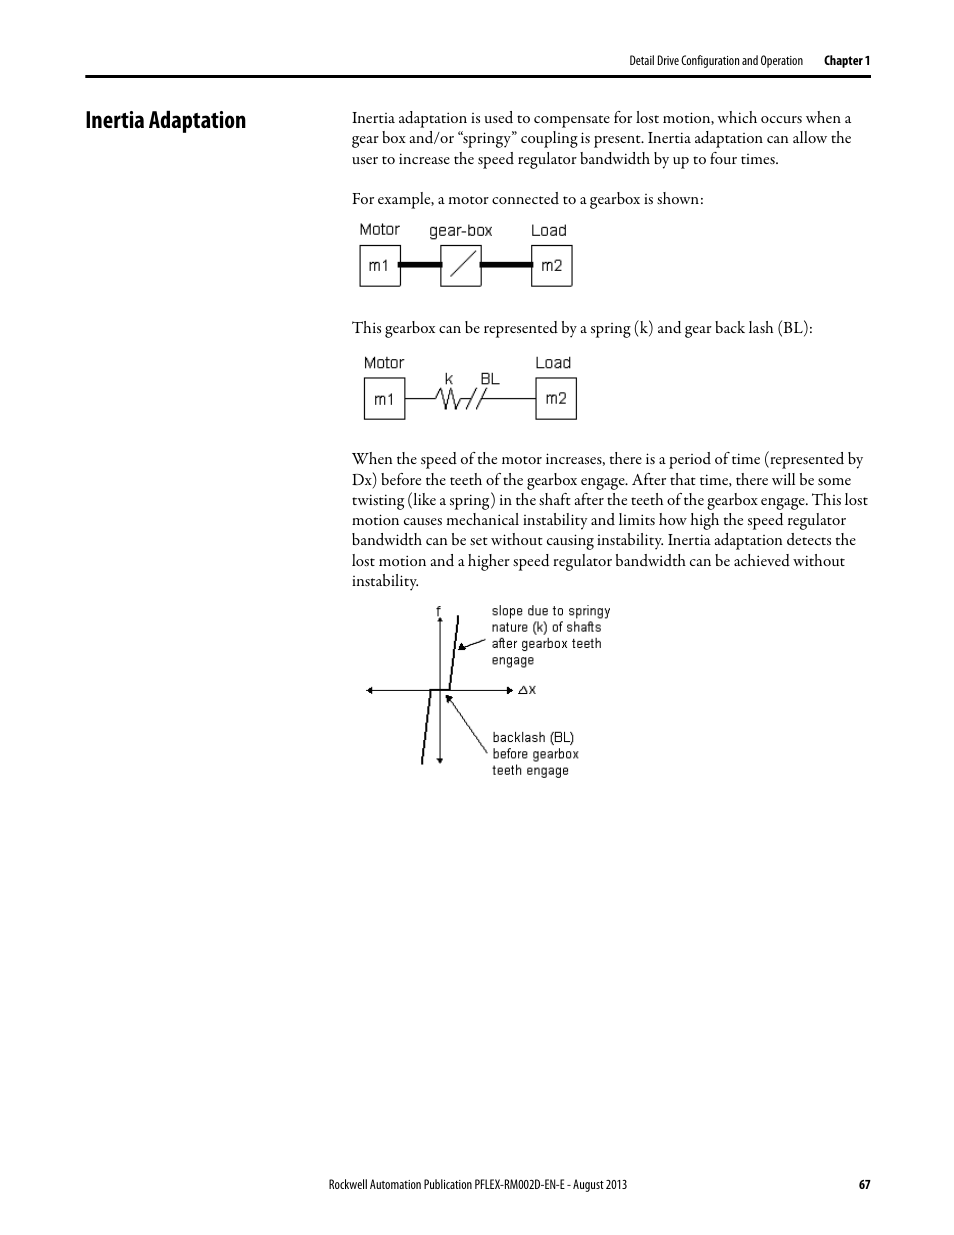 Inertia adaptation | Rockwell Automation 20D PowerFlex 700S with Phase I Control Reference Manual User Manual | Page 67 / 190